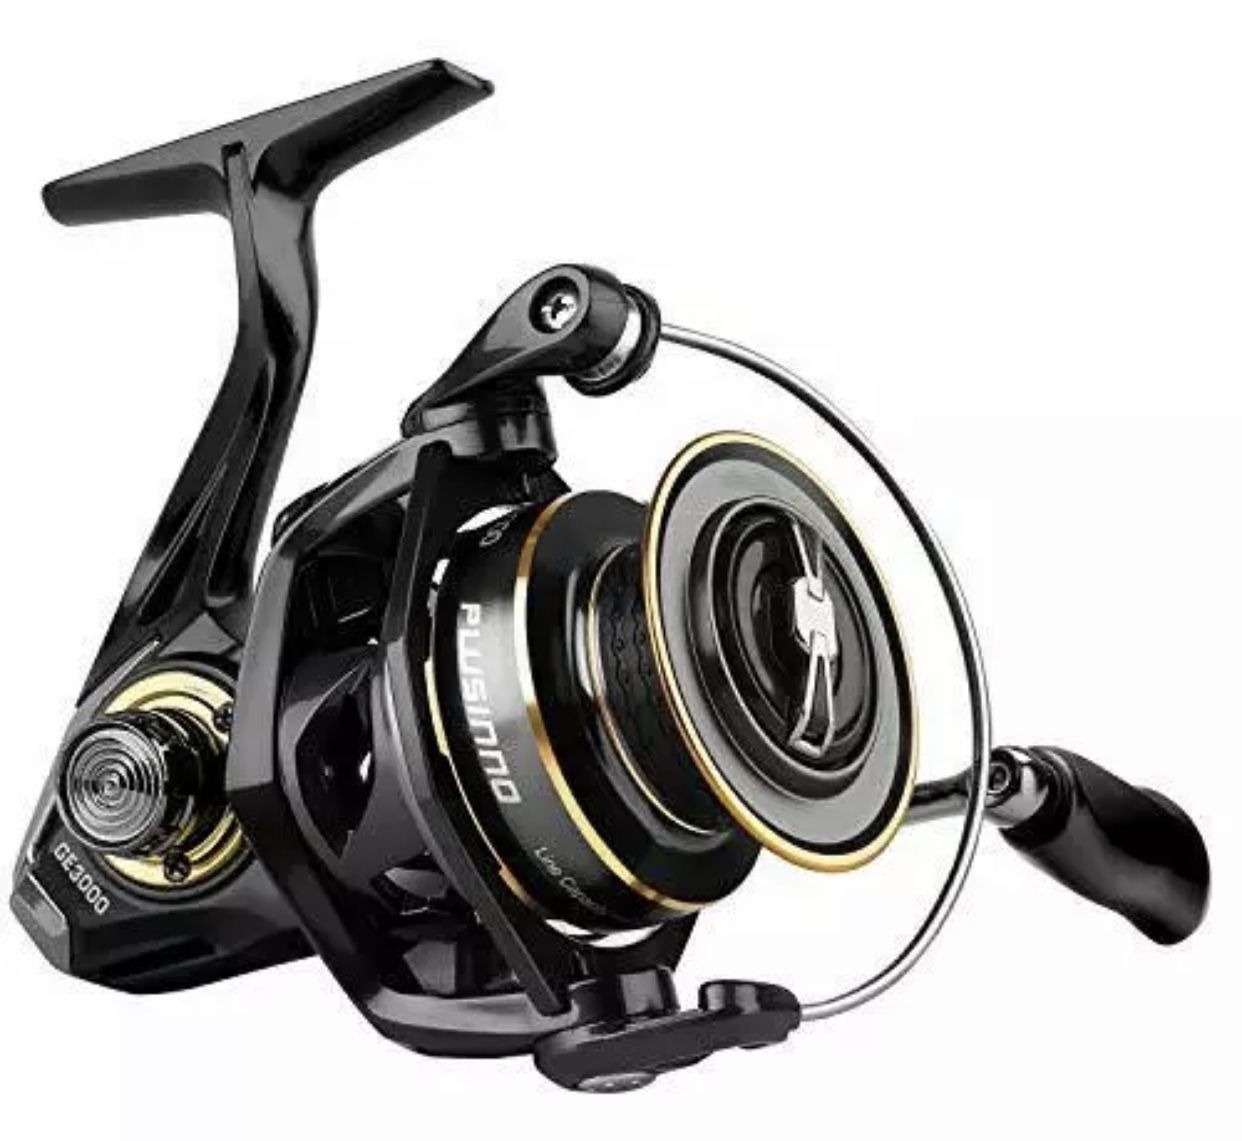 Plusinno Spinning Reel, 9+1 Bb Fishing Reel, Ultra Smooth Powerful (for kids) small size